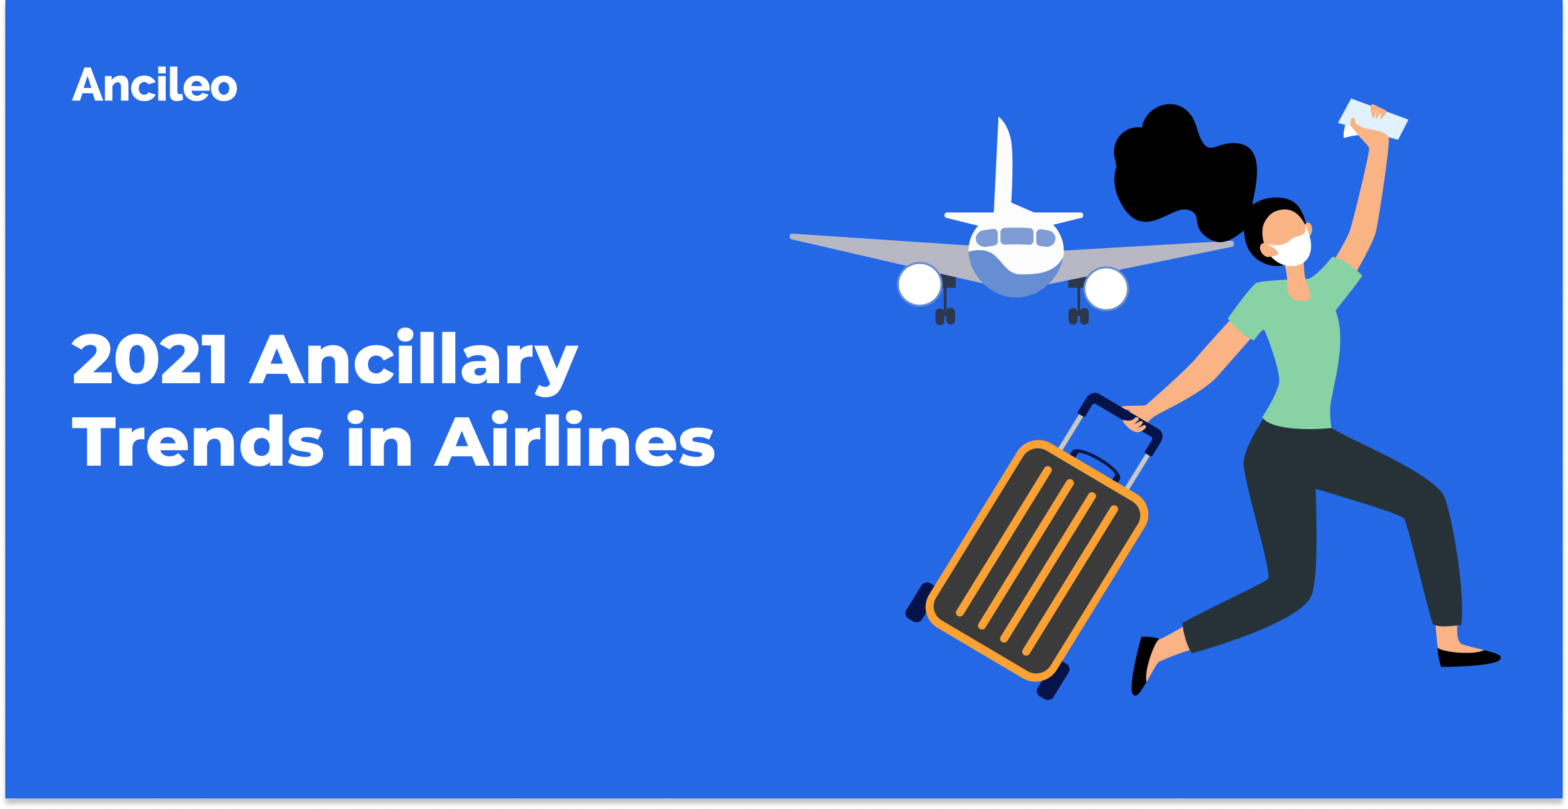 2021 Ancillary Trends in Airlines